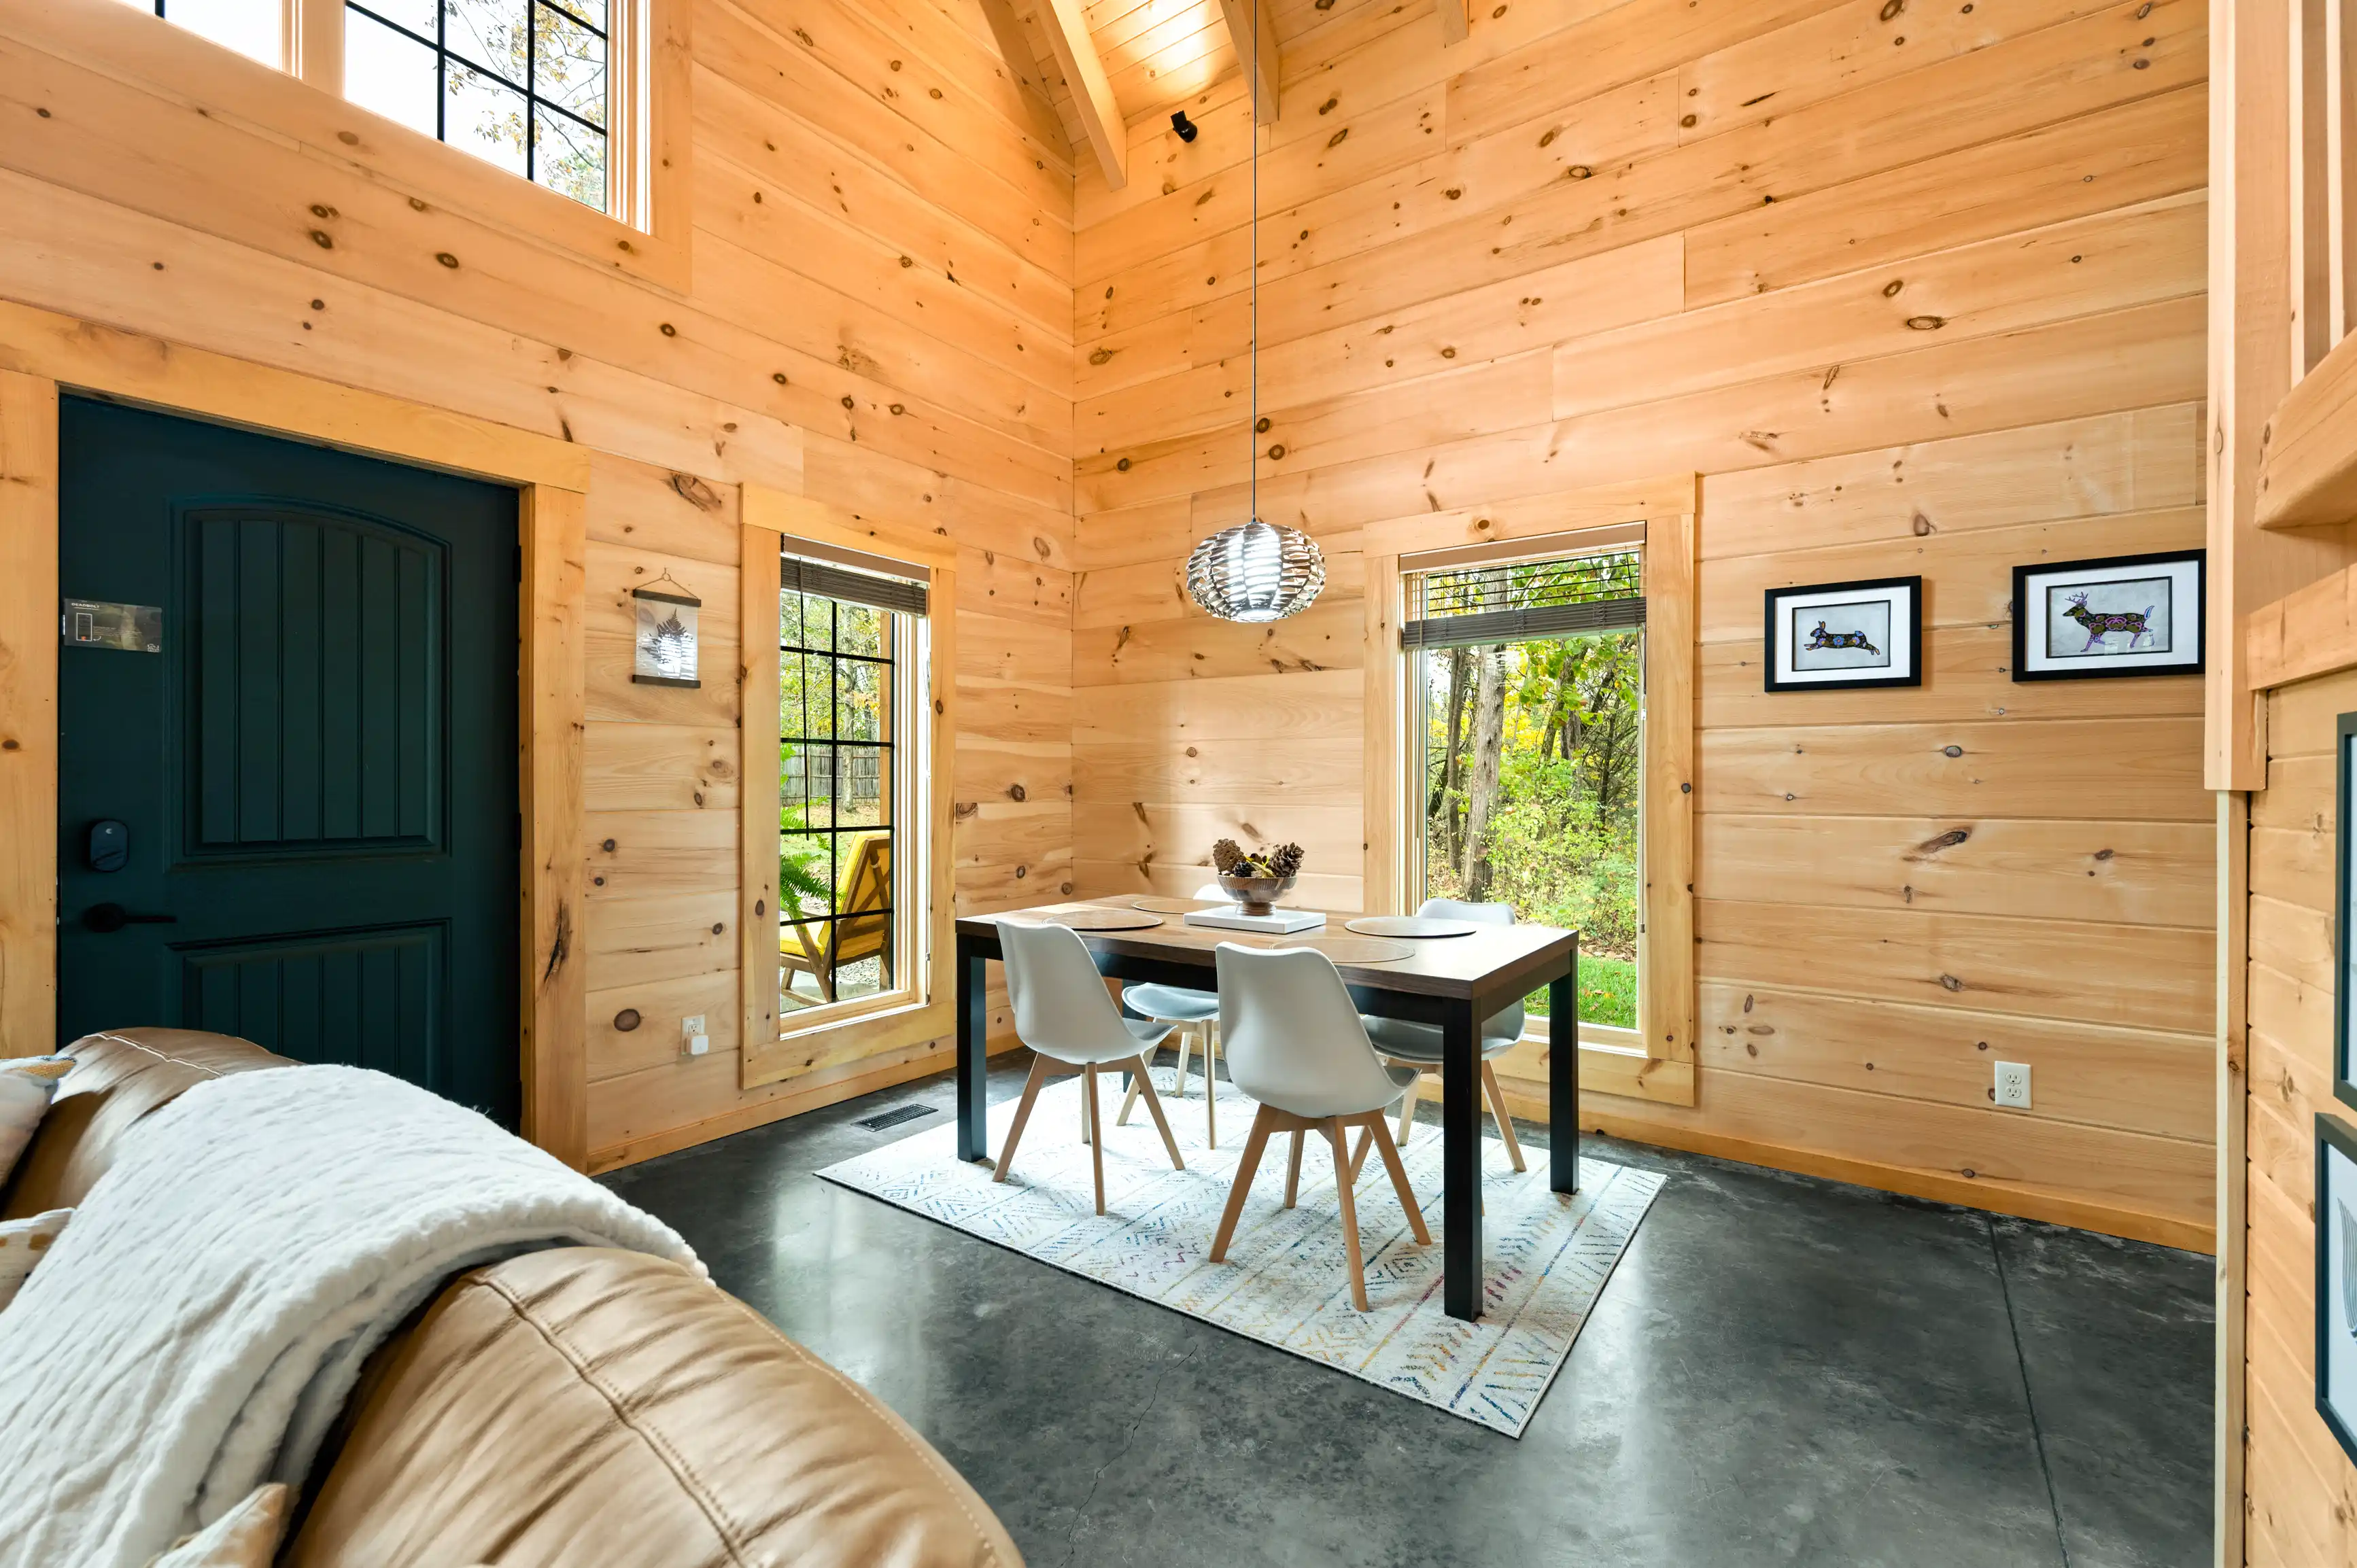 Cozy wooden cabin interior with a dining area, modern furniture, and large windows showing lush greenery outside.